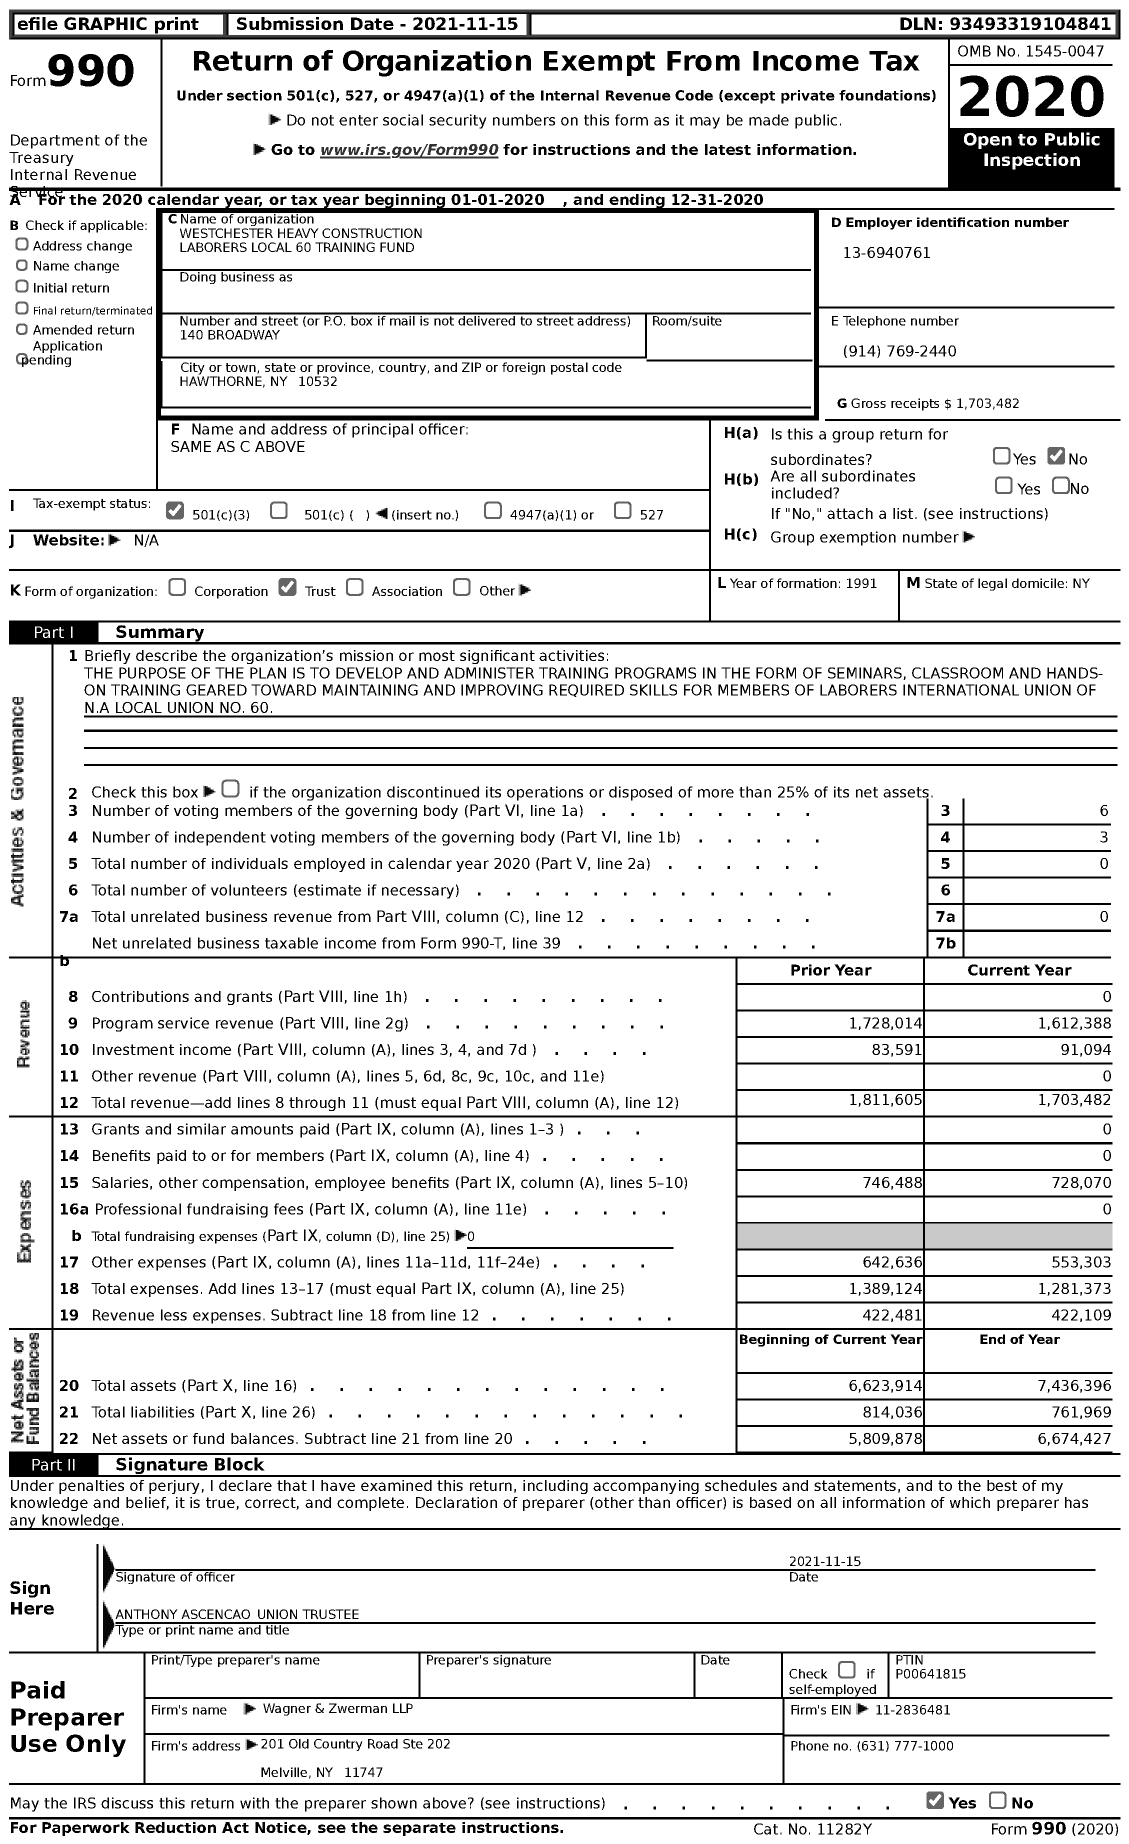 Image of first page of 2020 Form 990 for Westchester Heavy Construction Laborers Local 60 Training Fund